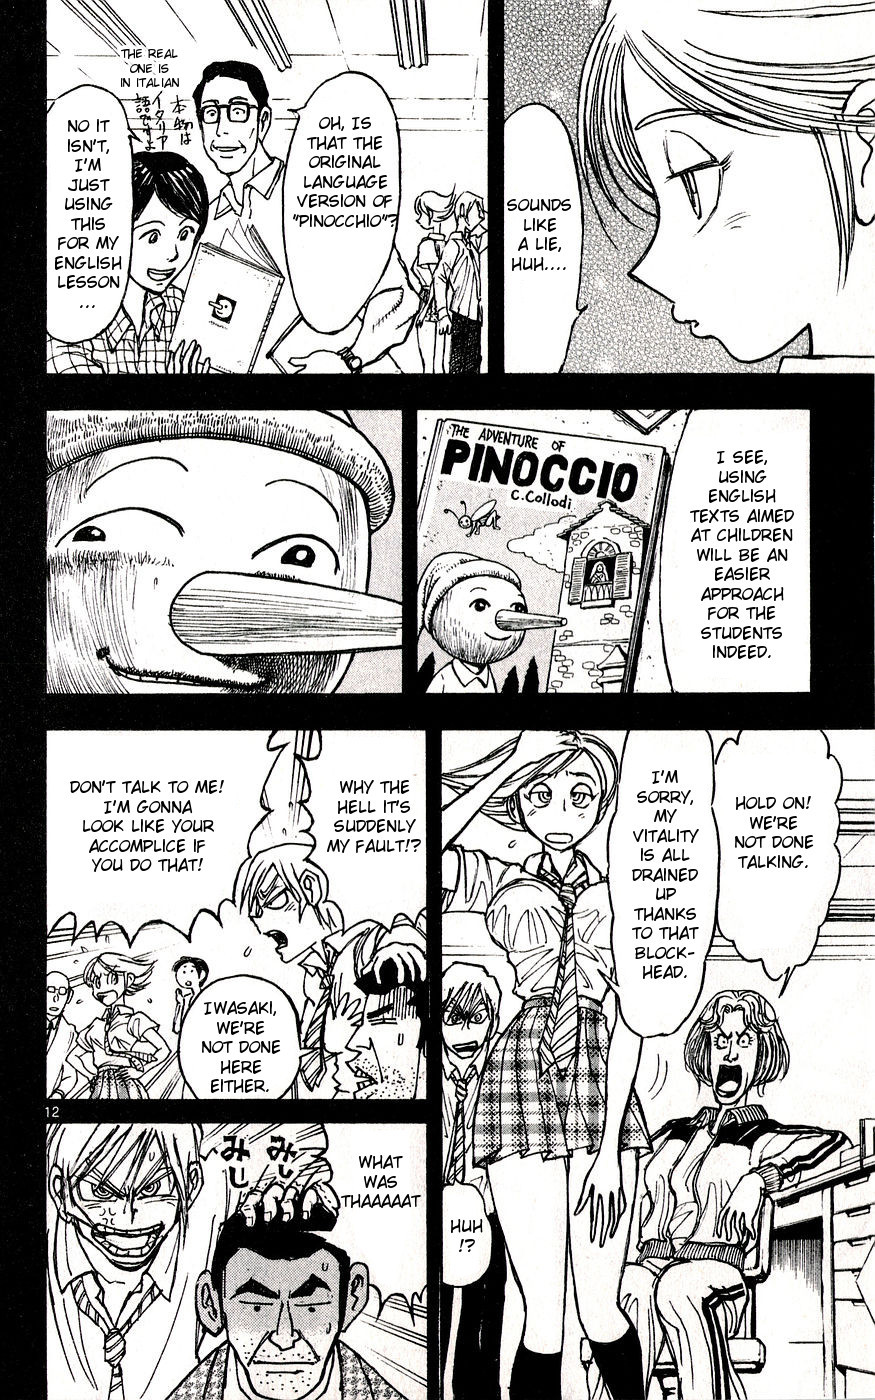 Moonlight Act Vol. 4 Ch. 32 6th Article Pinocchio